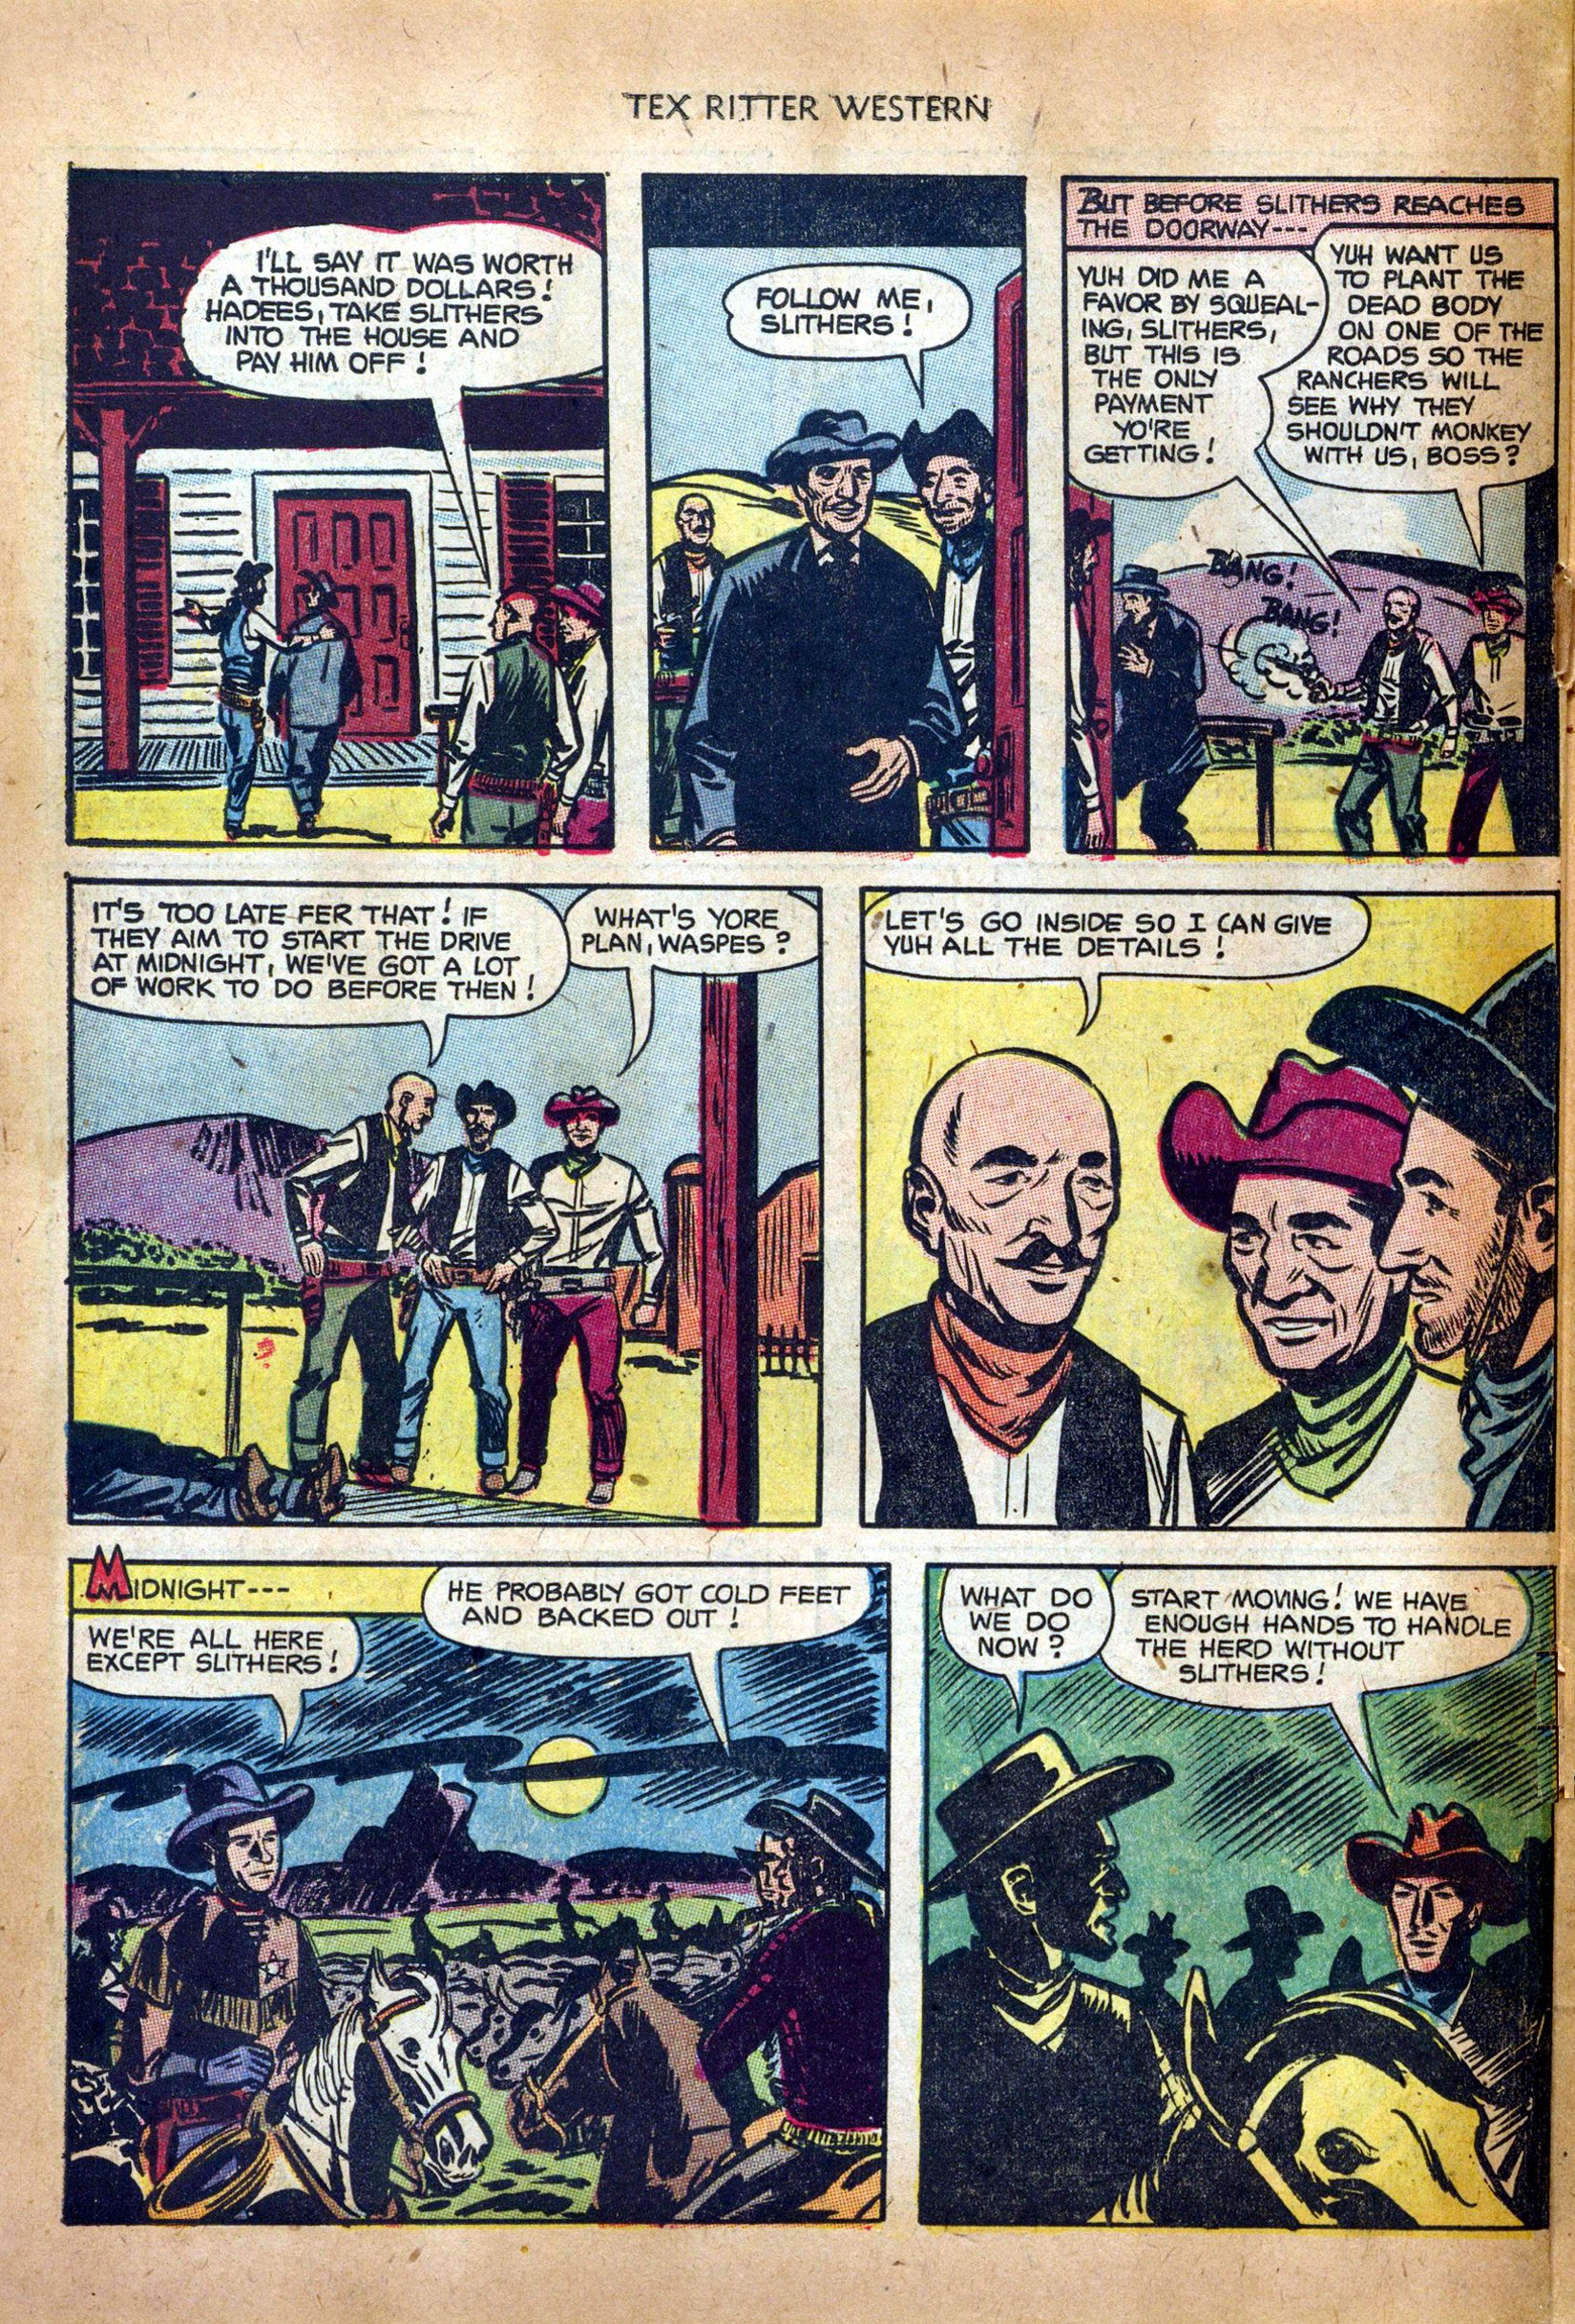 Read online Tex Ritter Western comic -  Issue #17 - 26